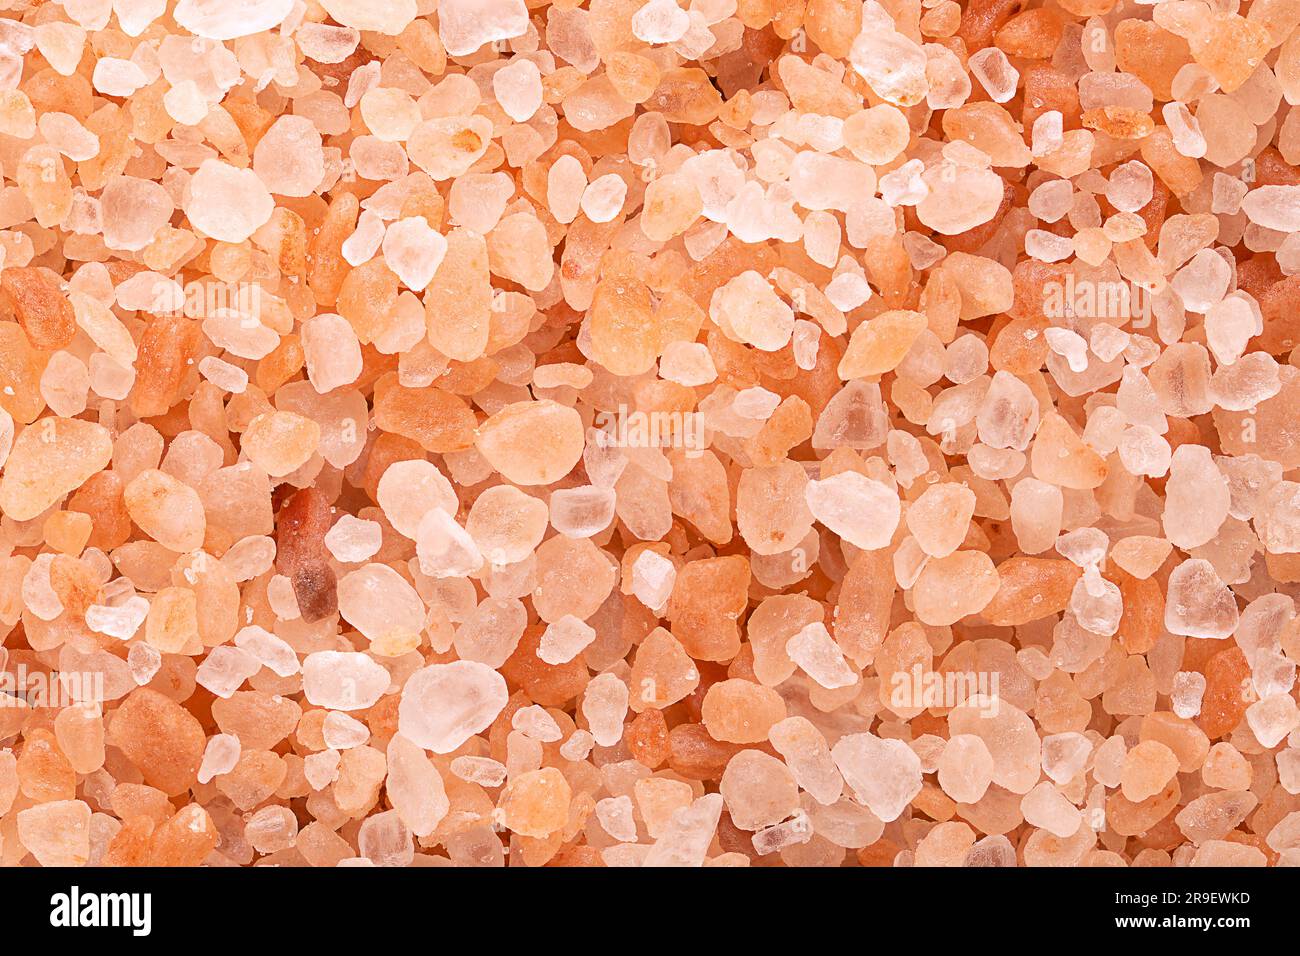 Himalayan salt, coarse crystals, macro photo. Rock salt, halite, with a pinkish tint, due to trace minerals, mined from the Punjab region. Stock Photo